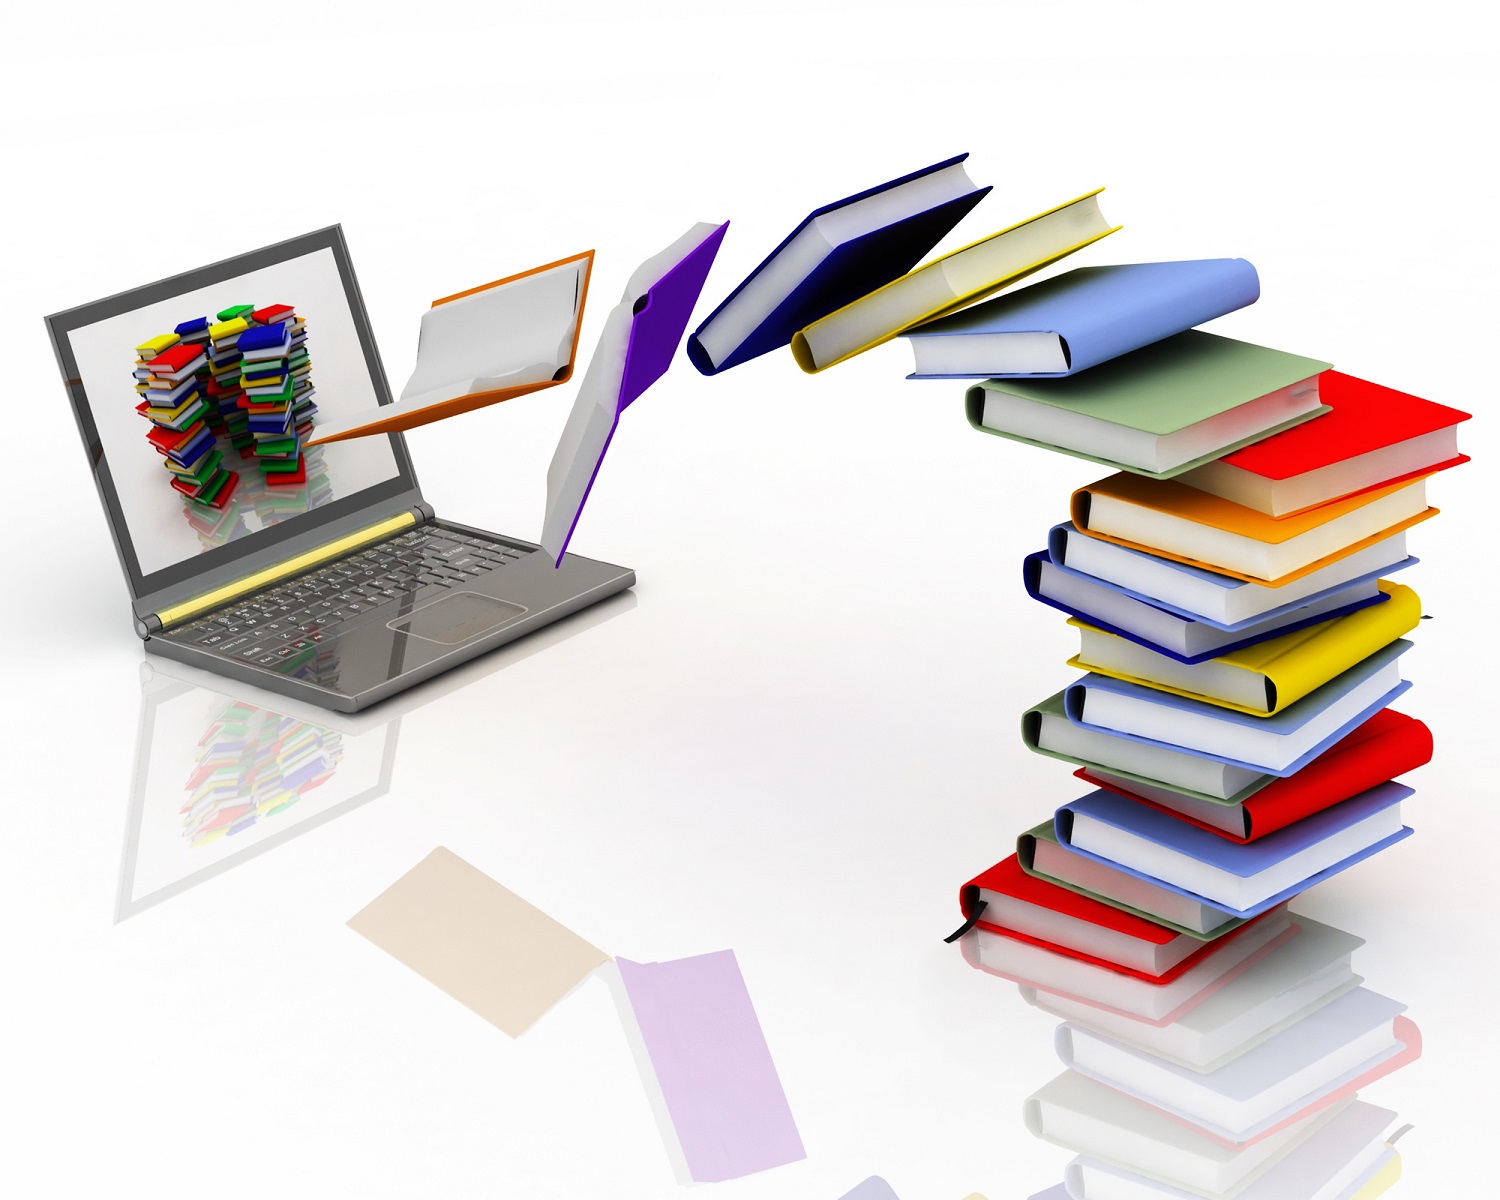 Show the transition of books to e-books, the demand of digital publishing is increasing with the modern times)